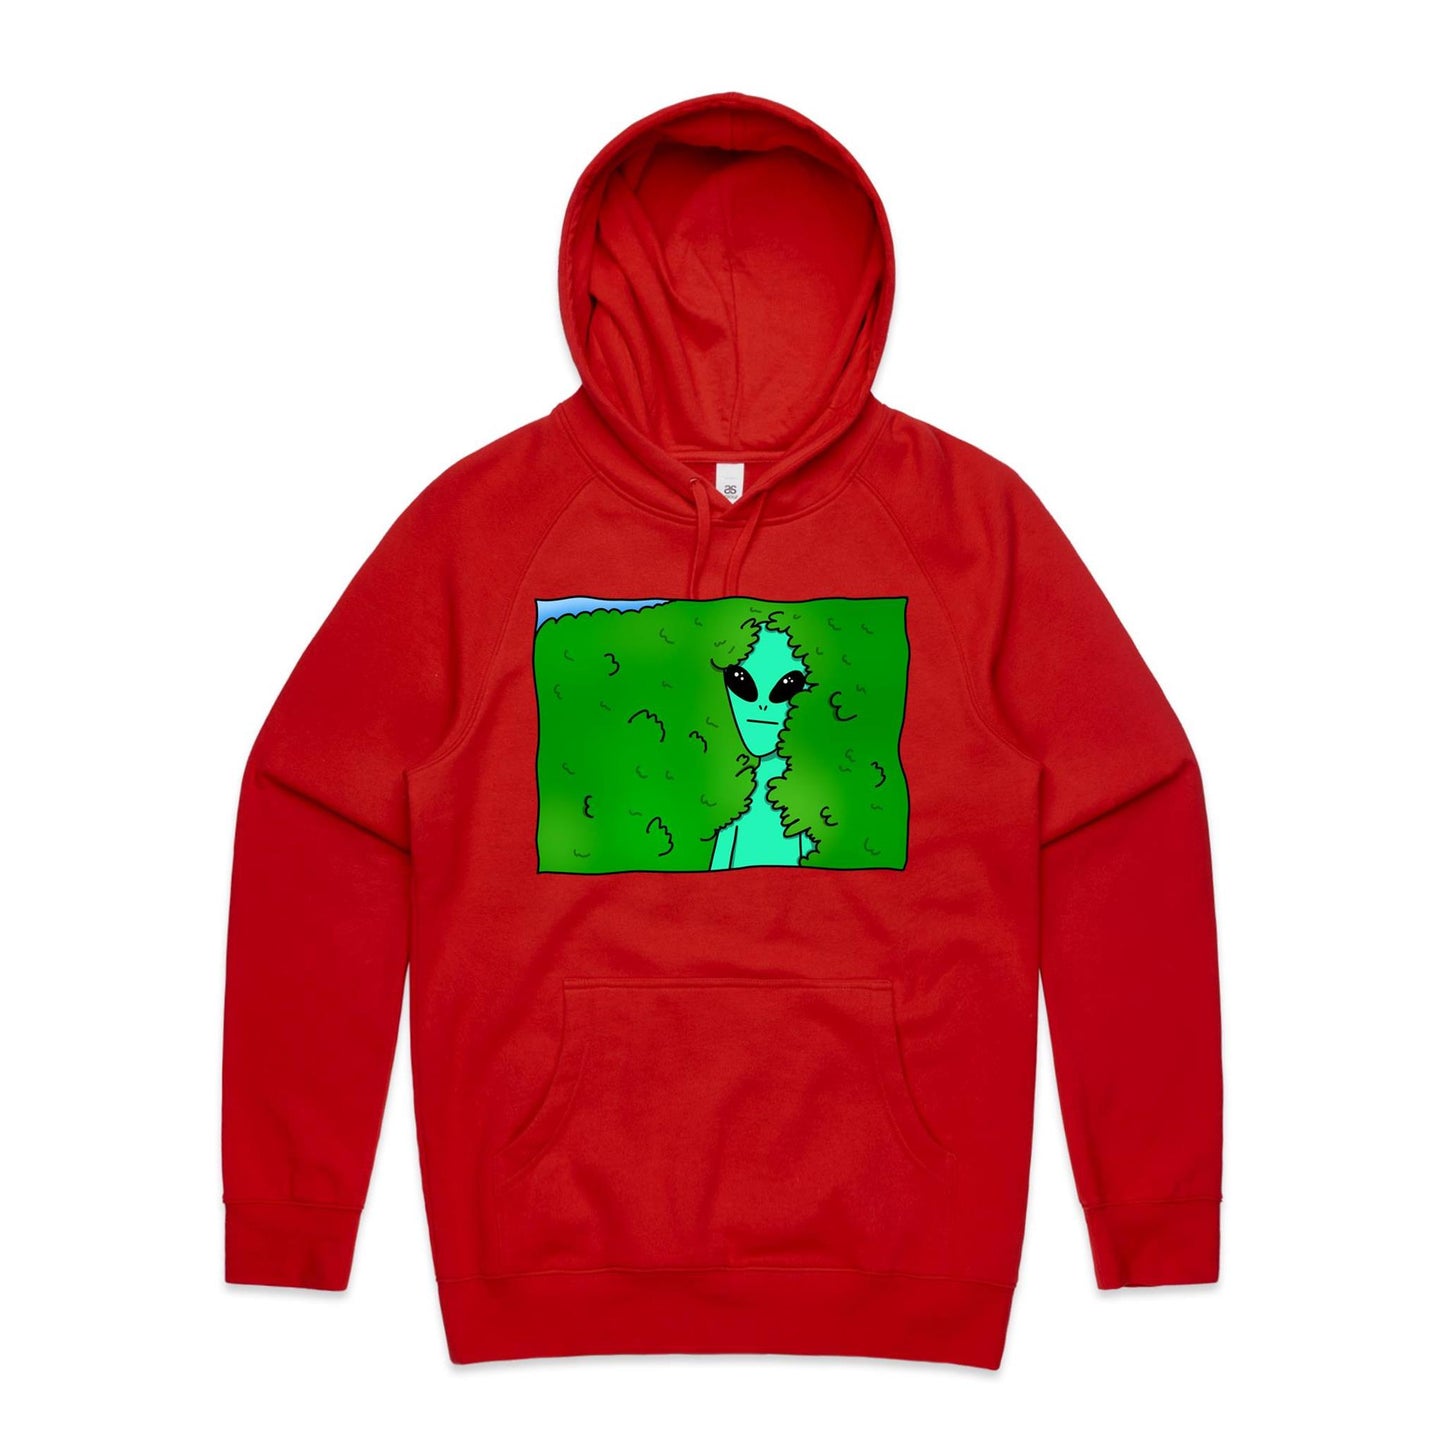 Alien Backing Into Hedge Meme - Supply Hood Red Mens Supply Hoodie Funny Sci Fi